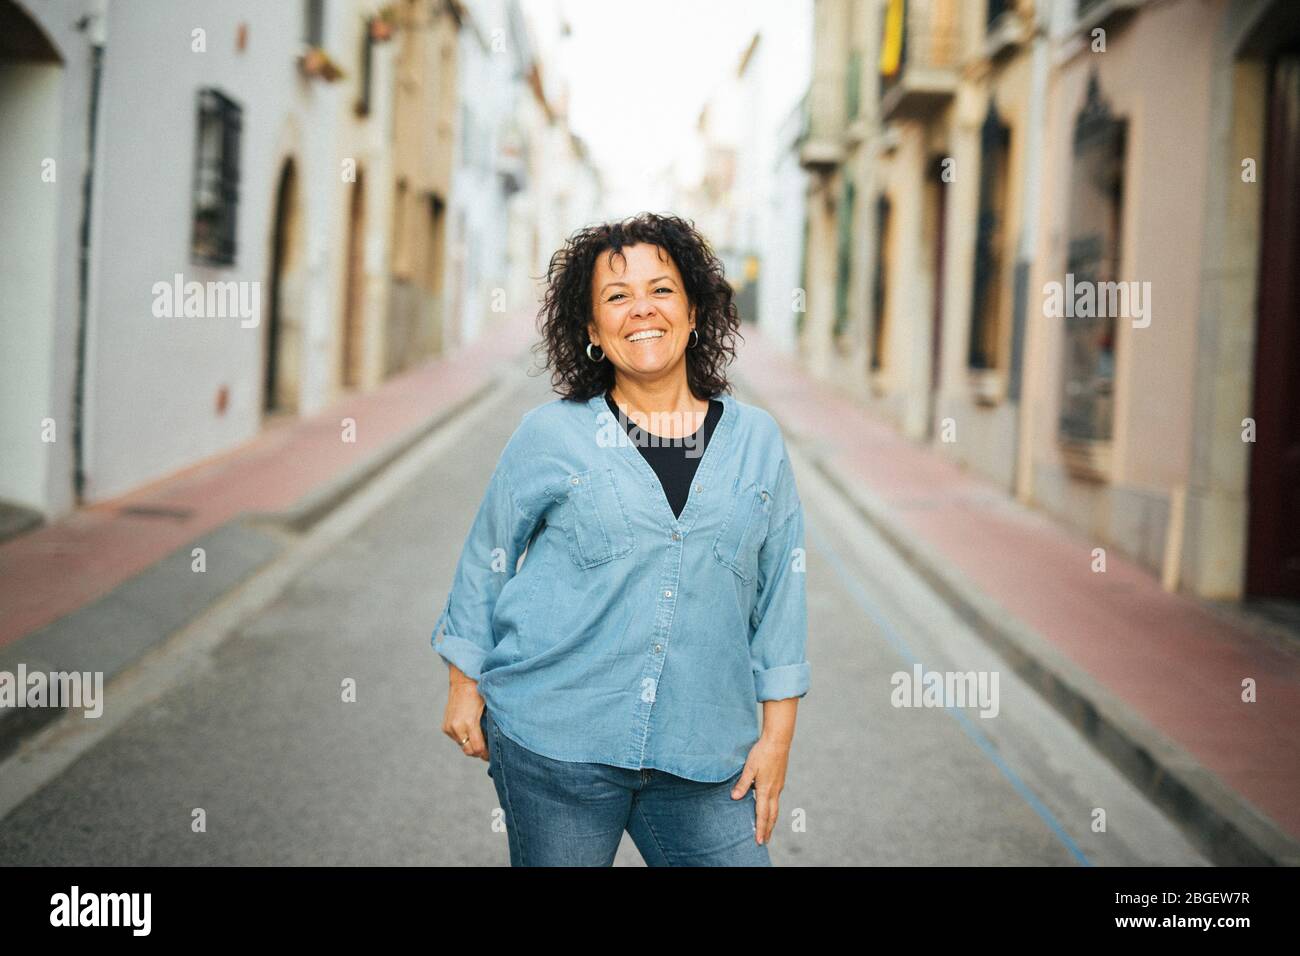 Portrait of a middle-aged smiling woman  on the street Stock Photo